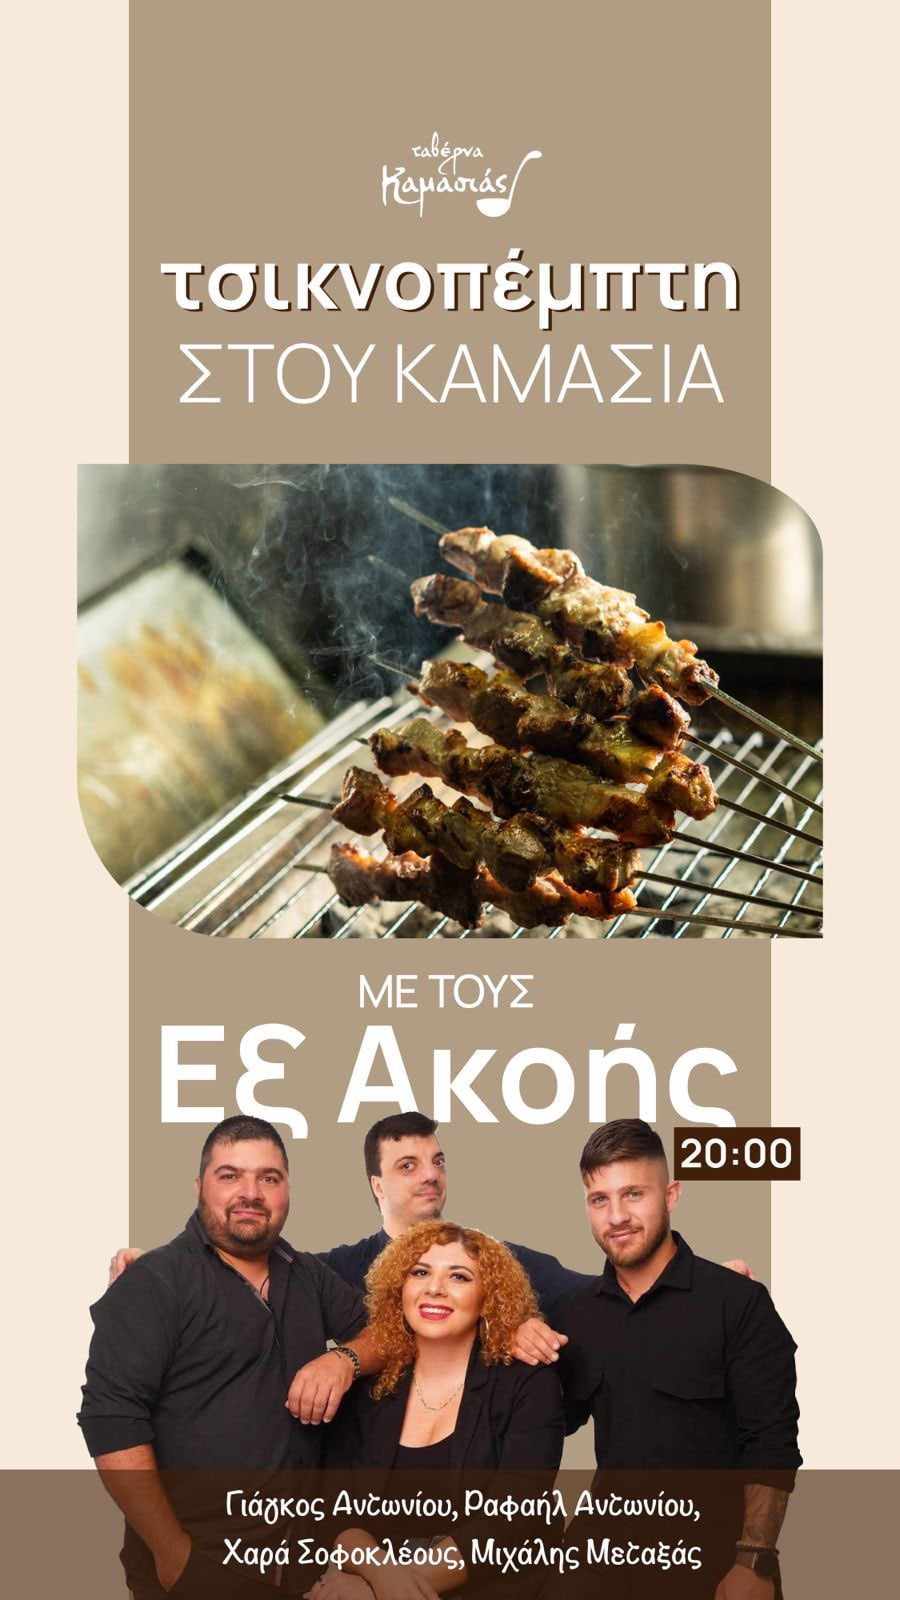 429340558 770984271189493 2389880765205699583 n exclusive, OUT OF HEAR, Taverna Kamasias, TSIKNOPEMPTI